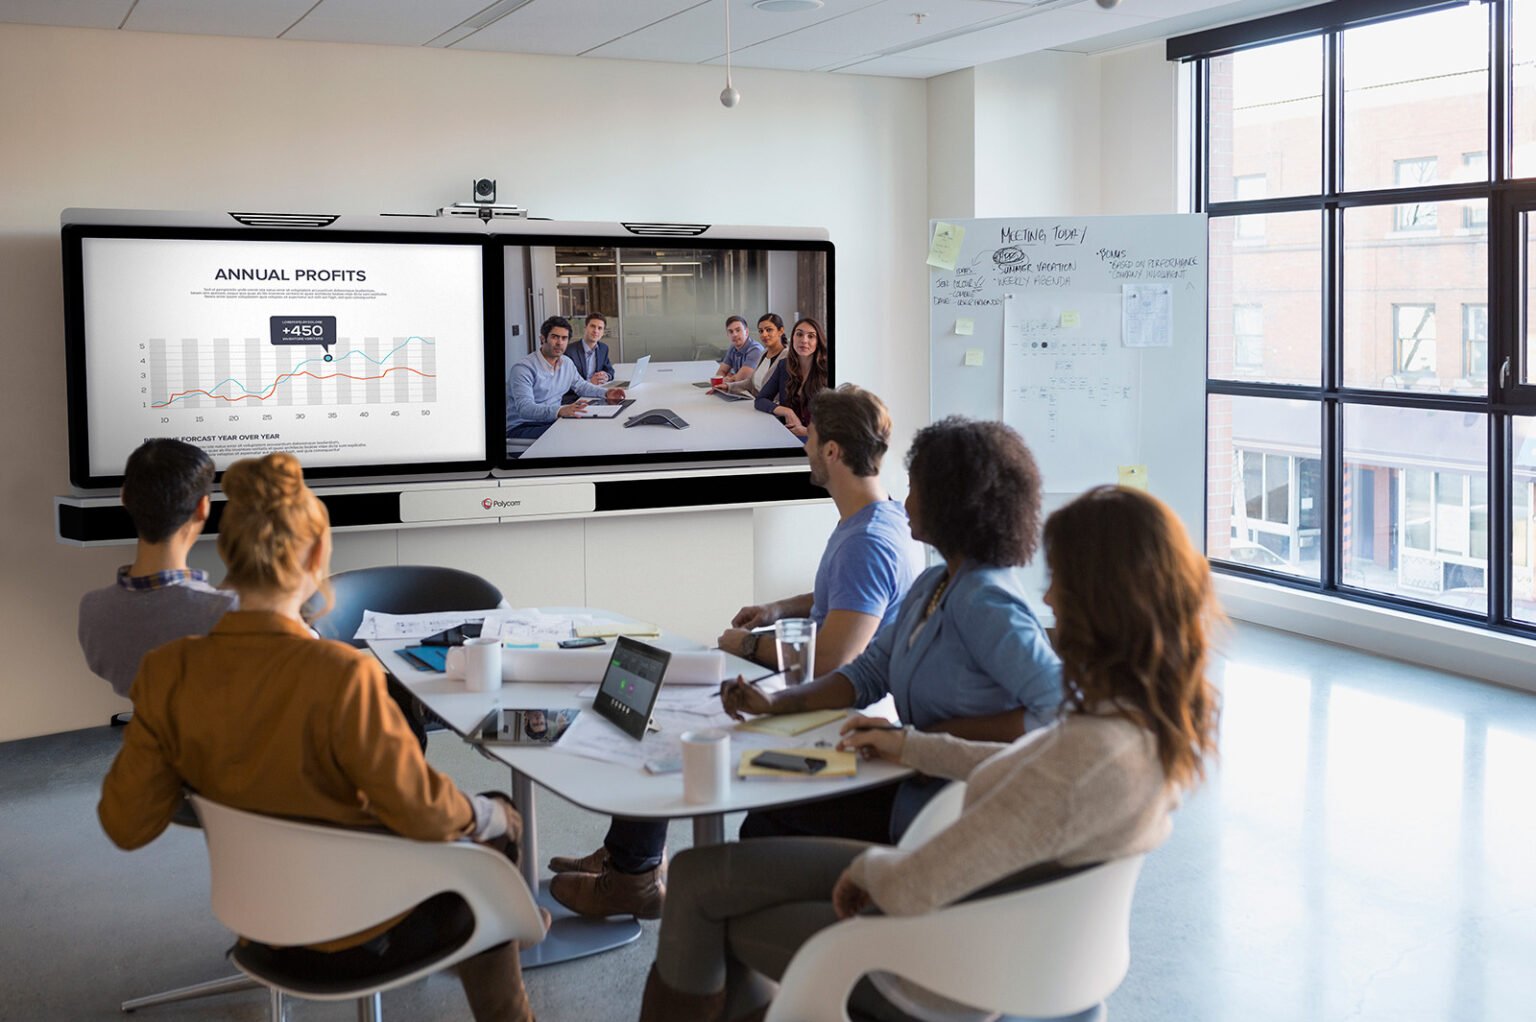 how presentation technology is used in the workplace